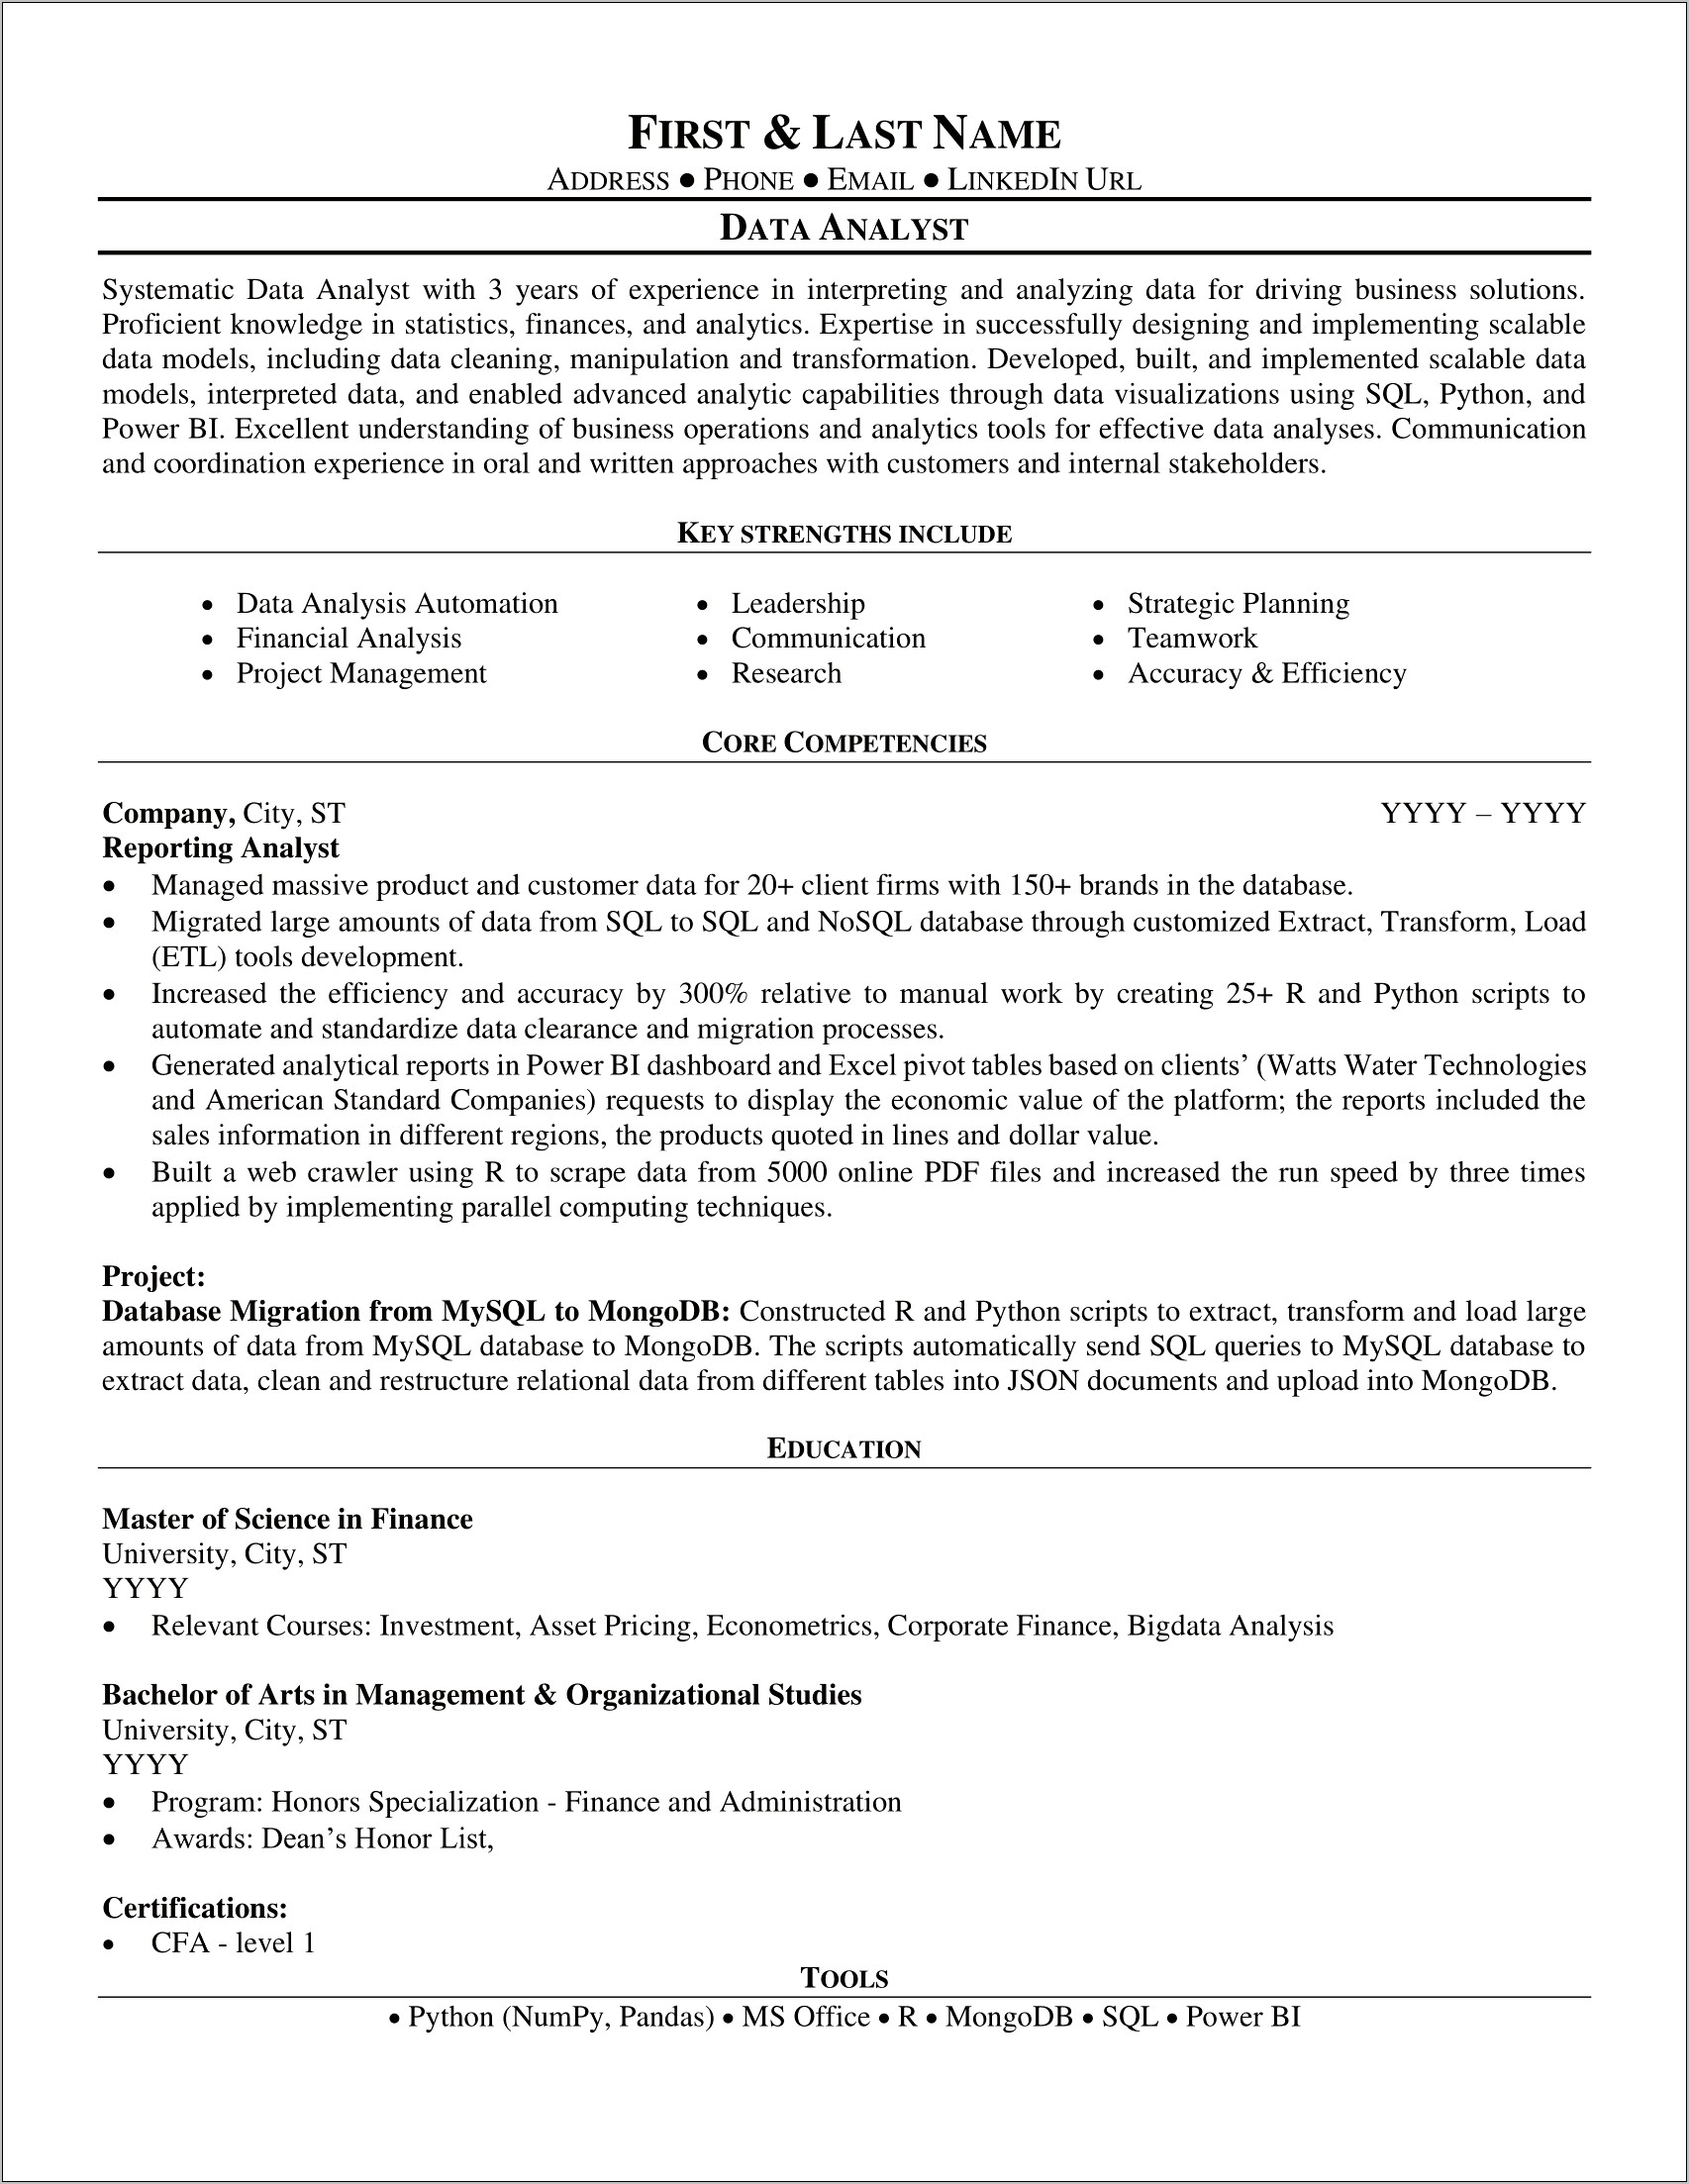 Resume Examples With Linkedin Url